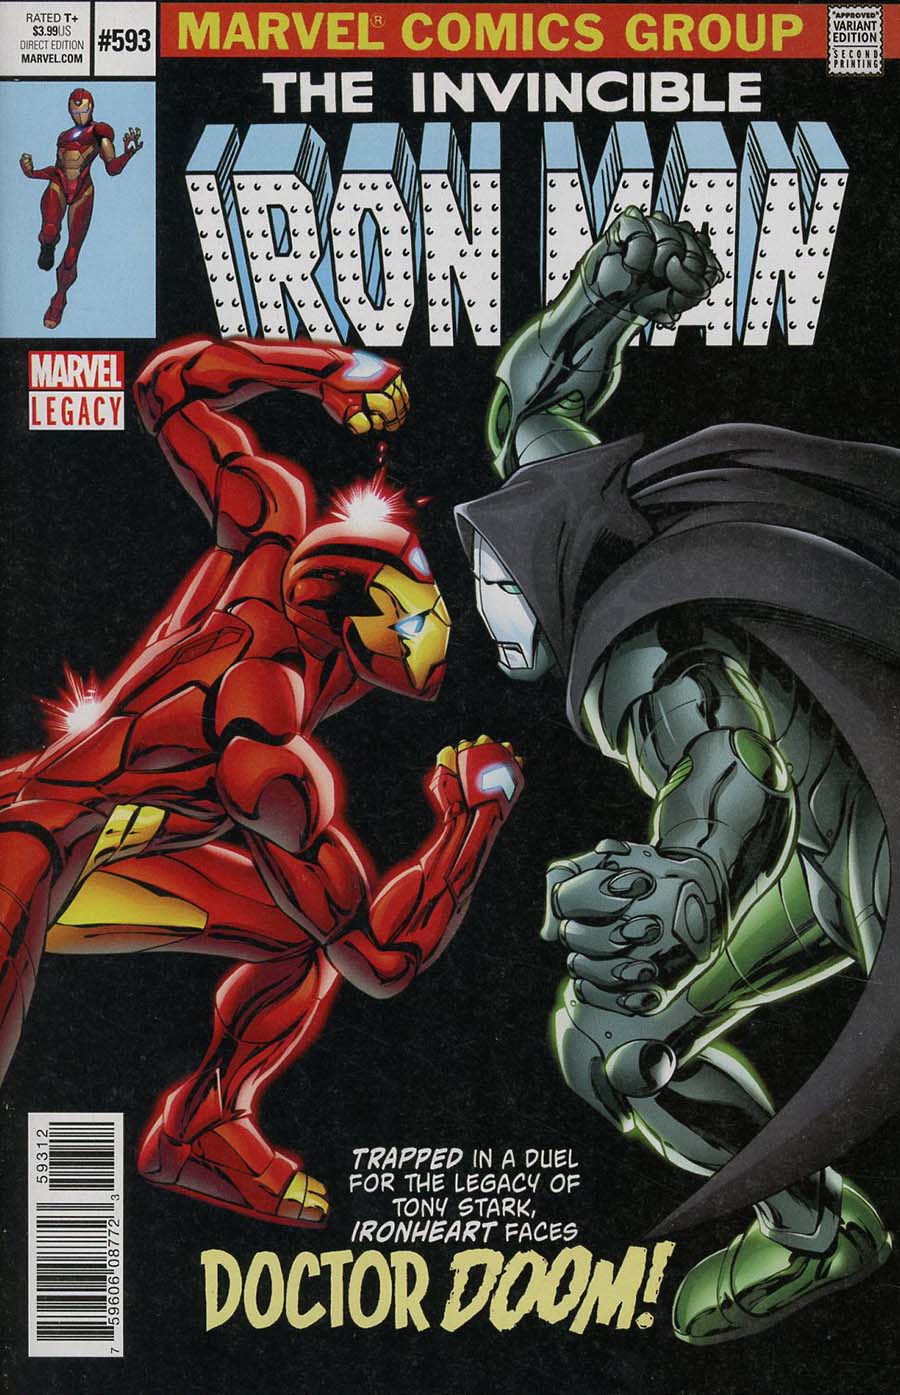 Invincible Iron Man Vol 3 #593 Cover G 2nd Ptg Variant Alan Davis Cover (Marvel Legacy Tie-In)